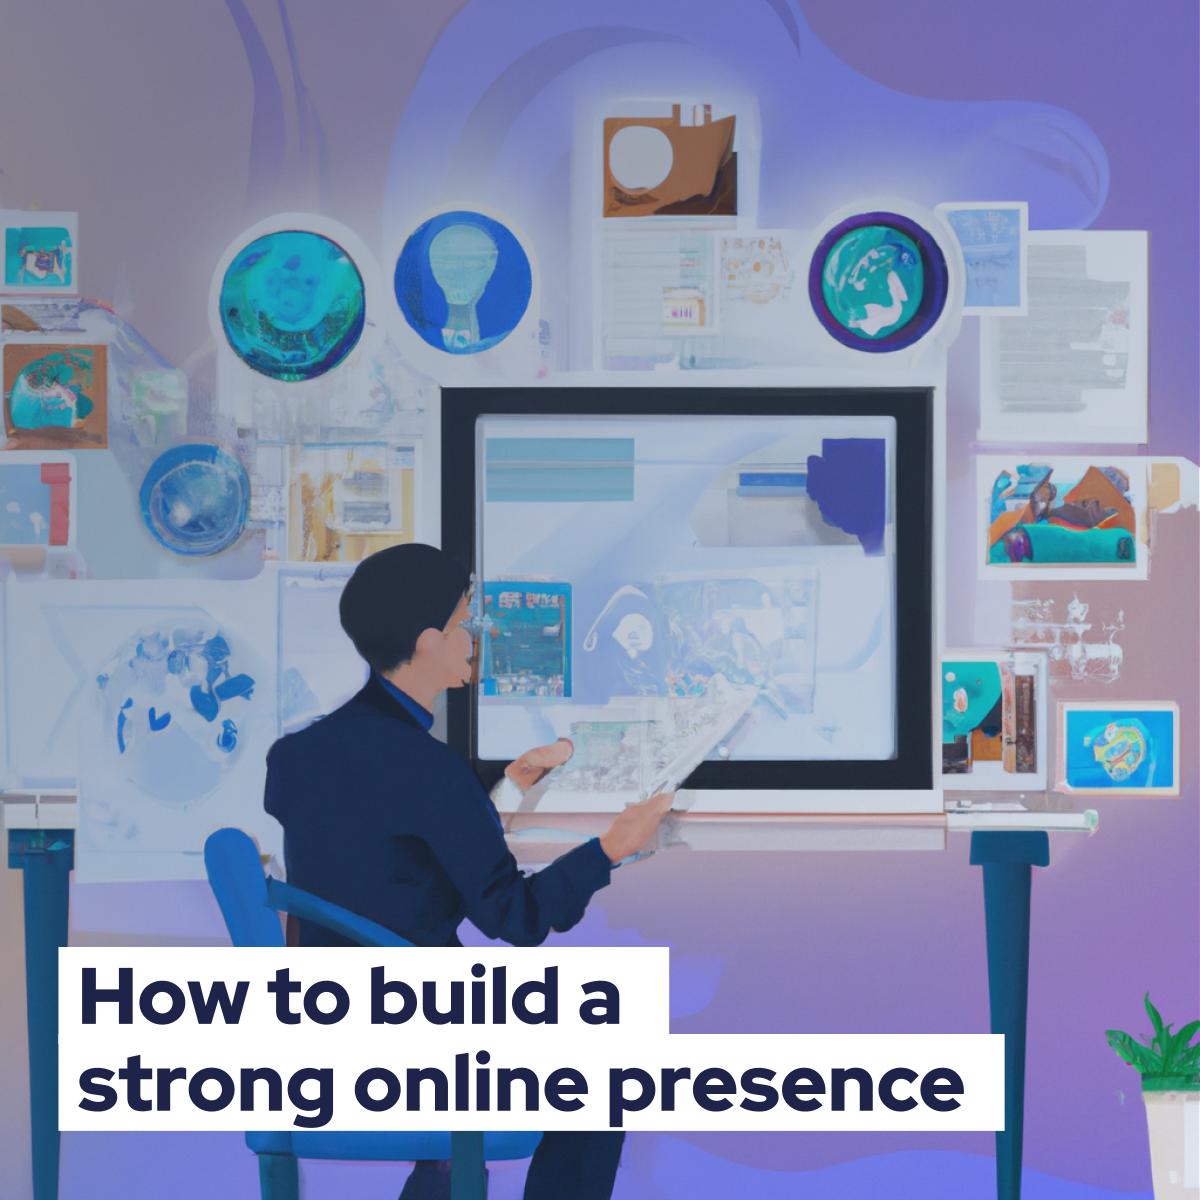 How to build a strong online presence